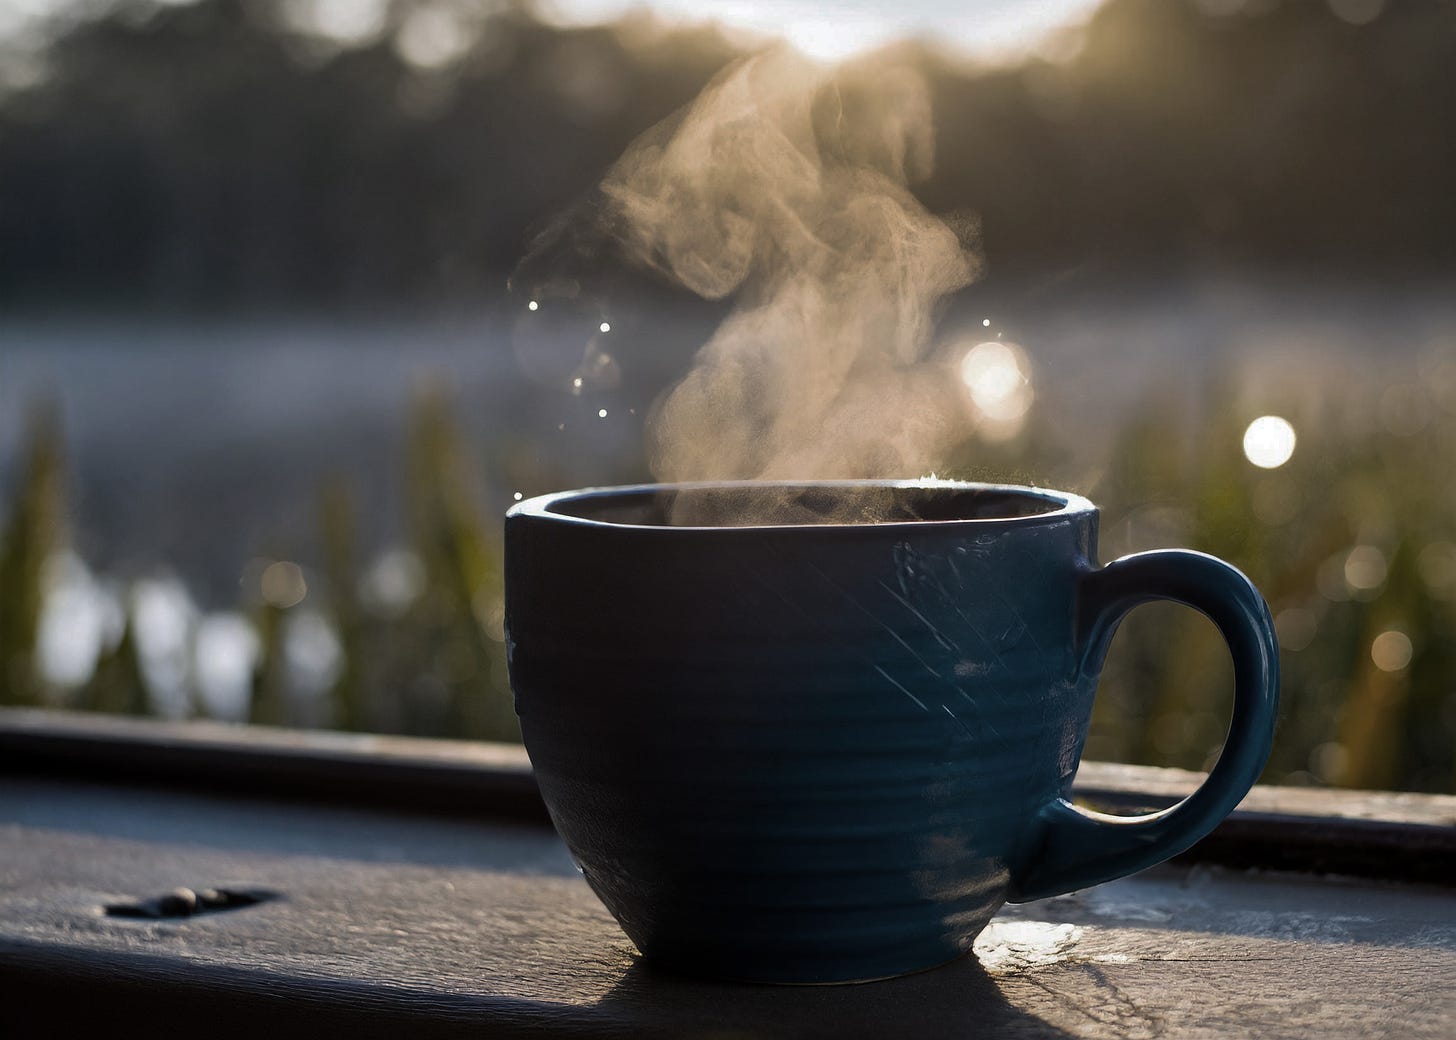 slightly mysterious blue pottery mug of coffee with sparkles of light rising in steam